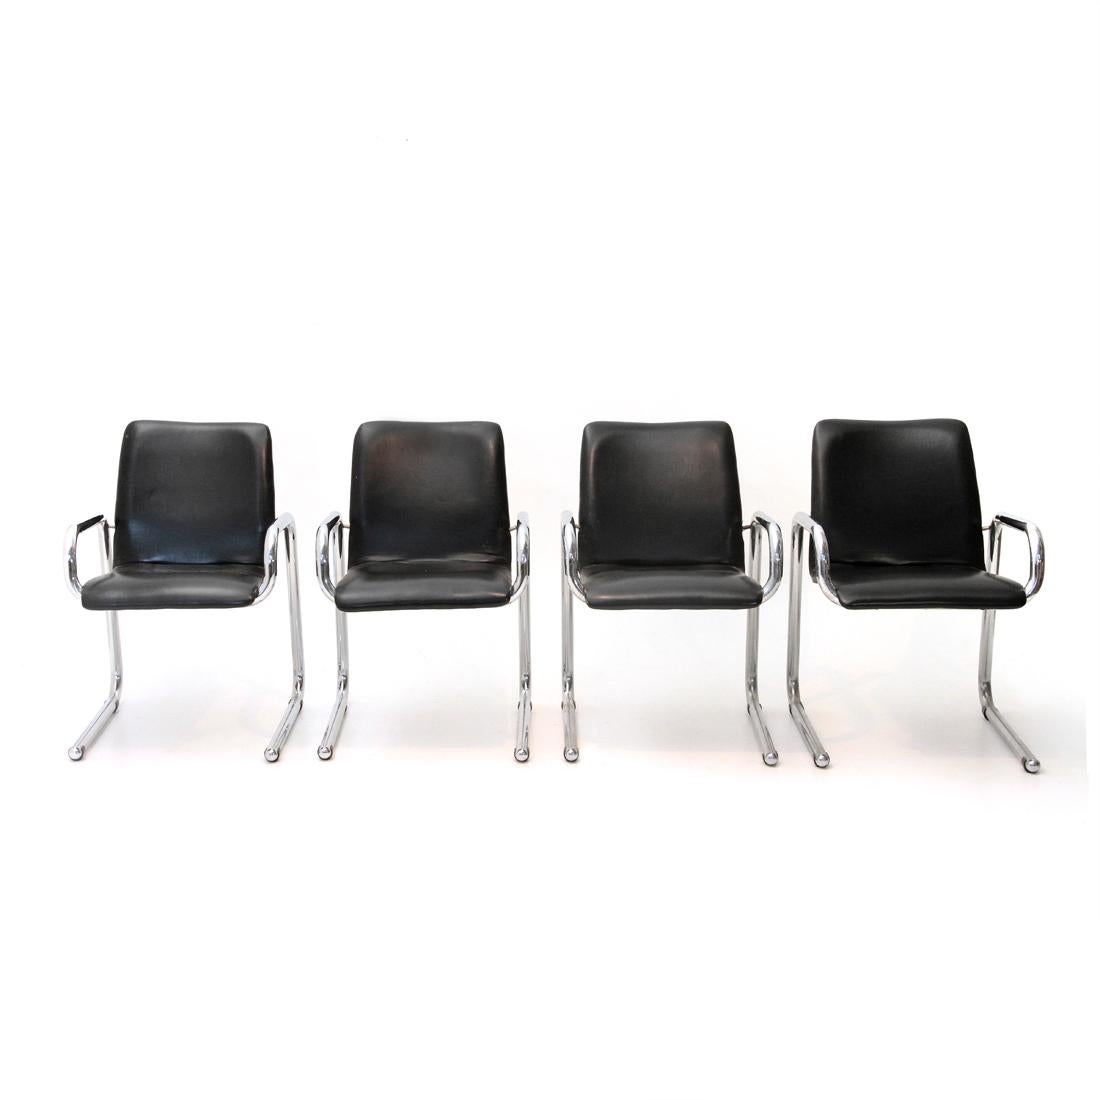 Four 1960s Italian manufacturing chairs.
Chromed metal frame.
Seat consisting of a padded metal body lined with black leatherette.
Good general conditions, some signs due to normal use over time, threadbare fabric in some places.

Dimensions: